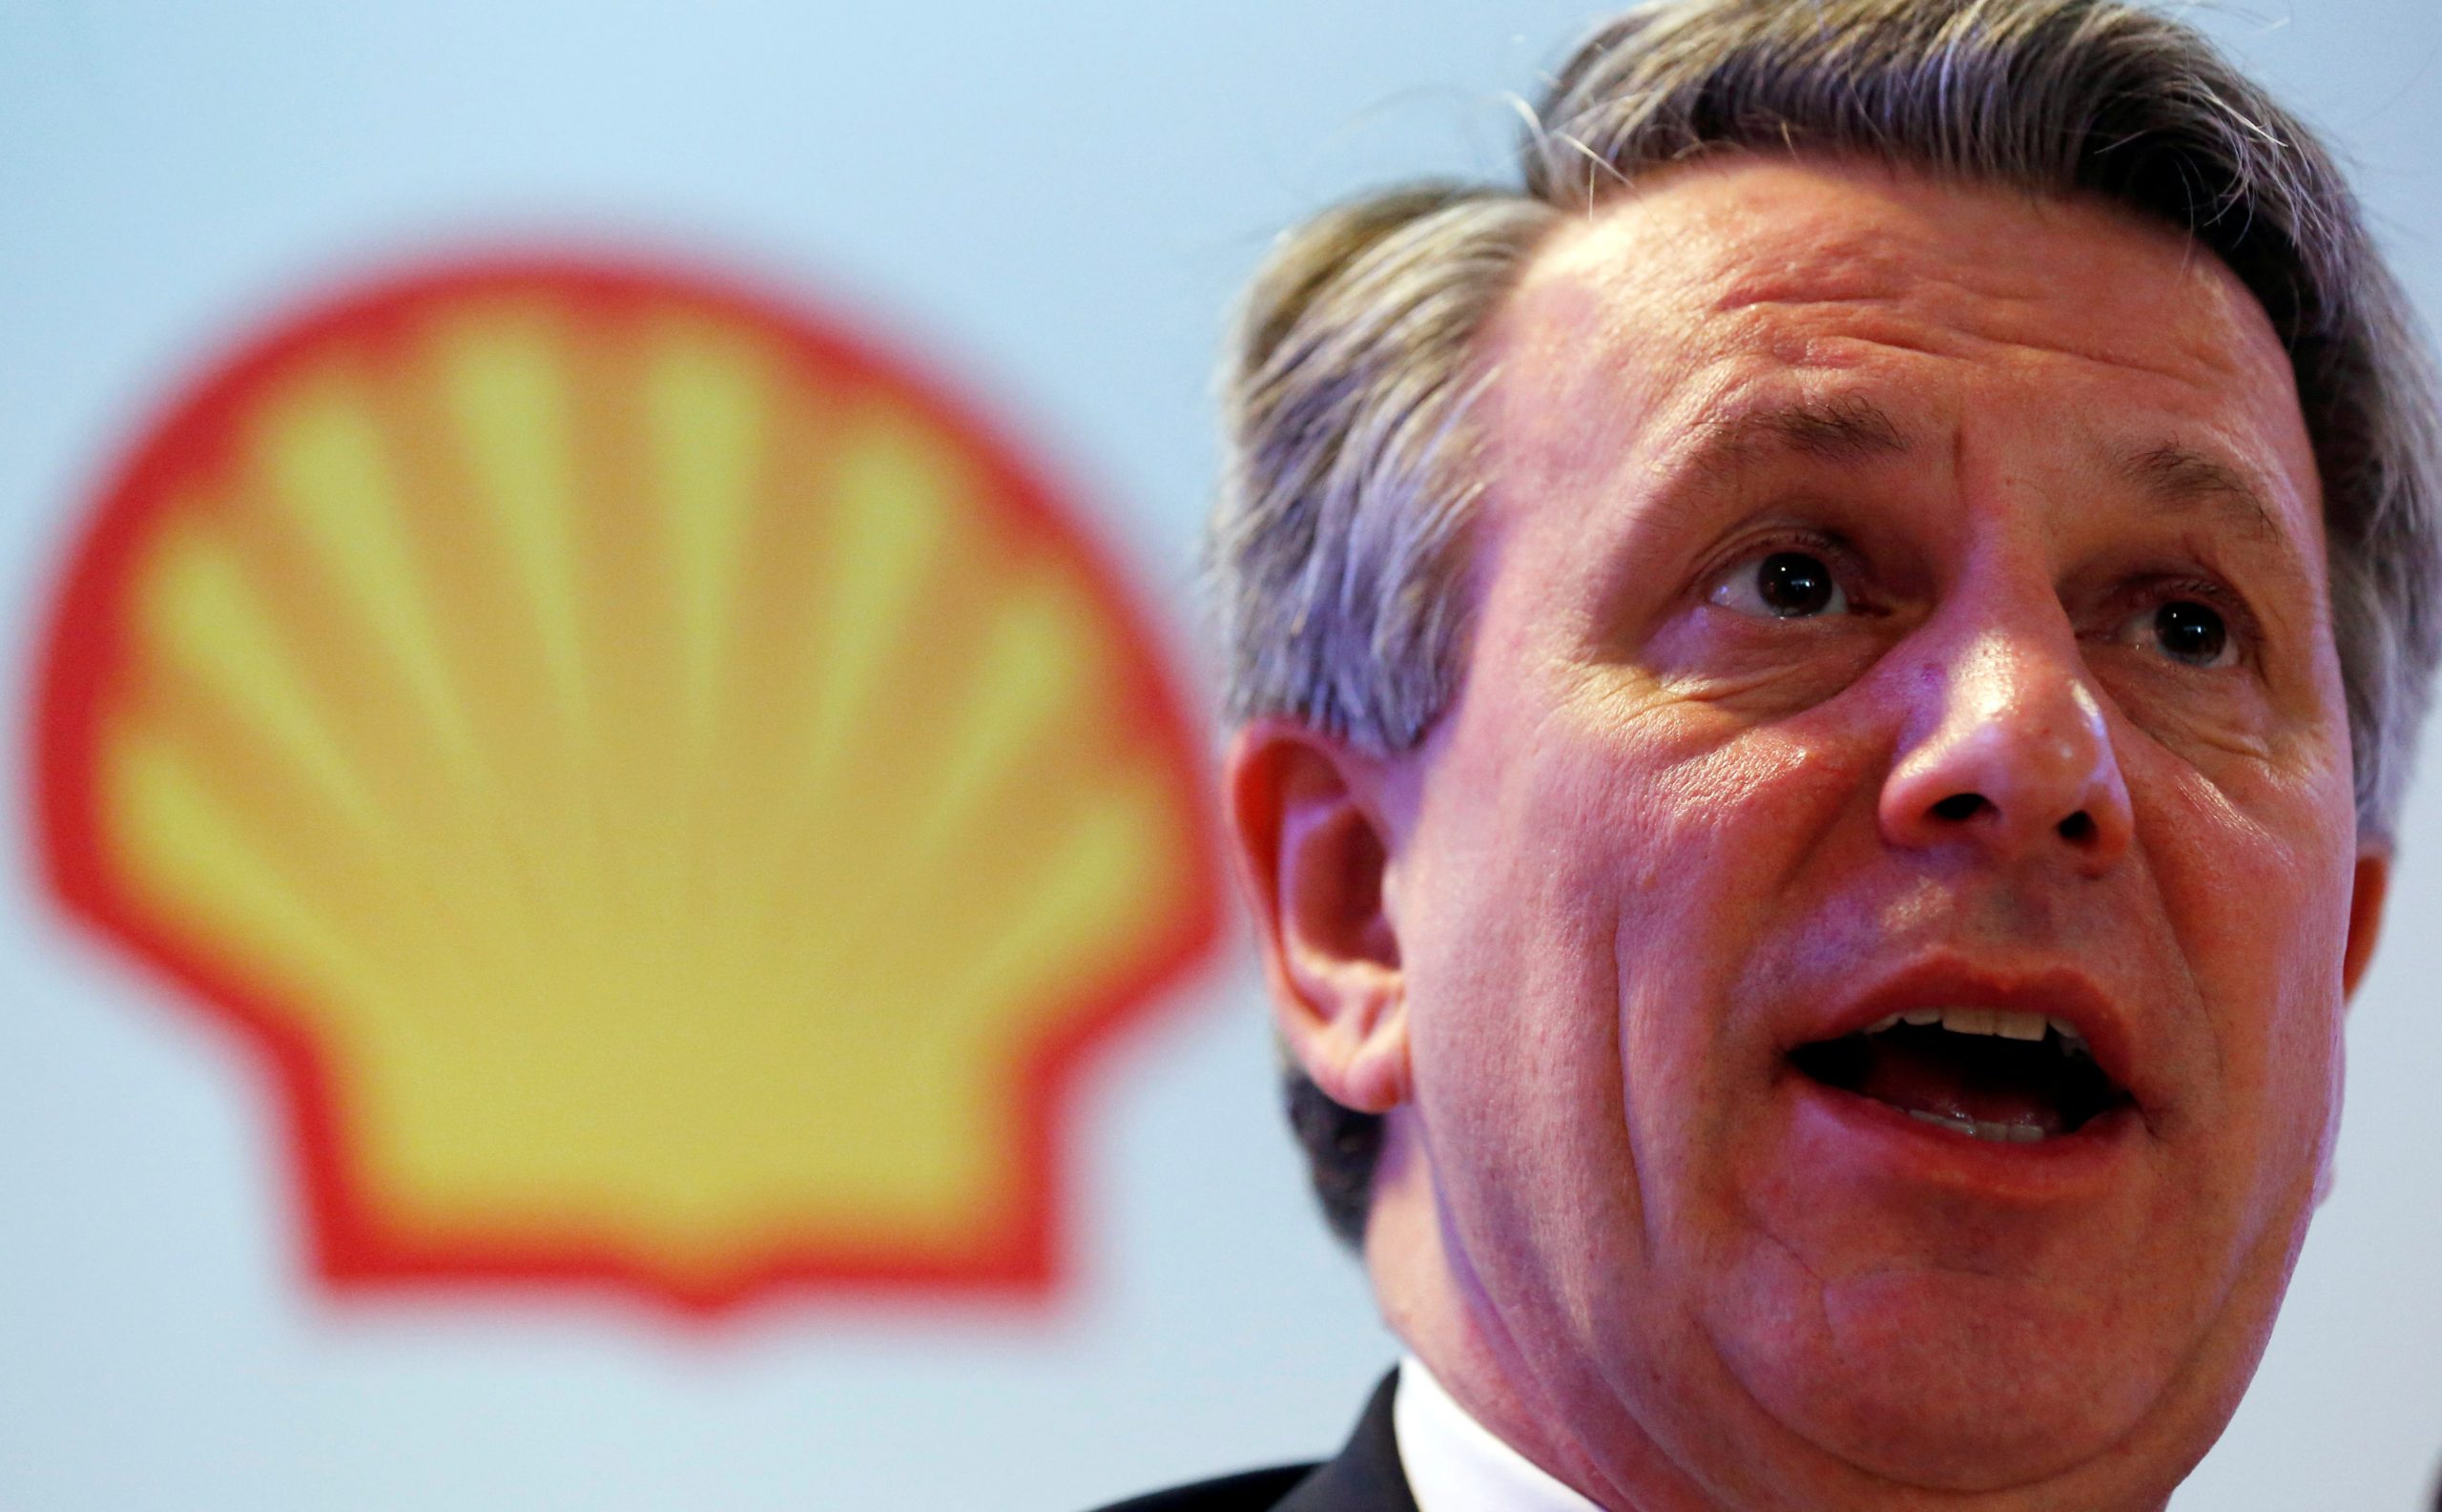 FILE PHOTO: Ben van Beurden, chief executive of Royal Dutch Shell, speaks during a news conference in Rio de Janeiro, Brazil, February 15, 2016. REUTERS/Sergio Moraes/File Photo